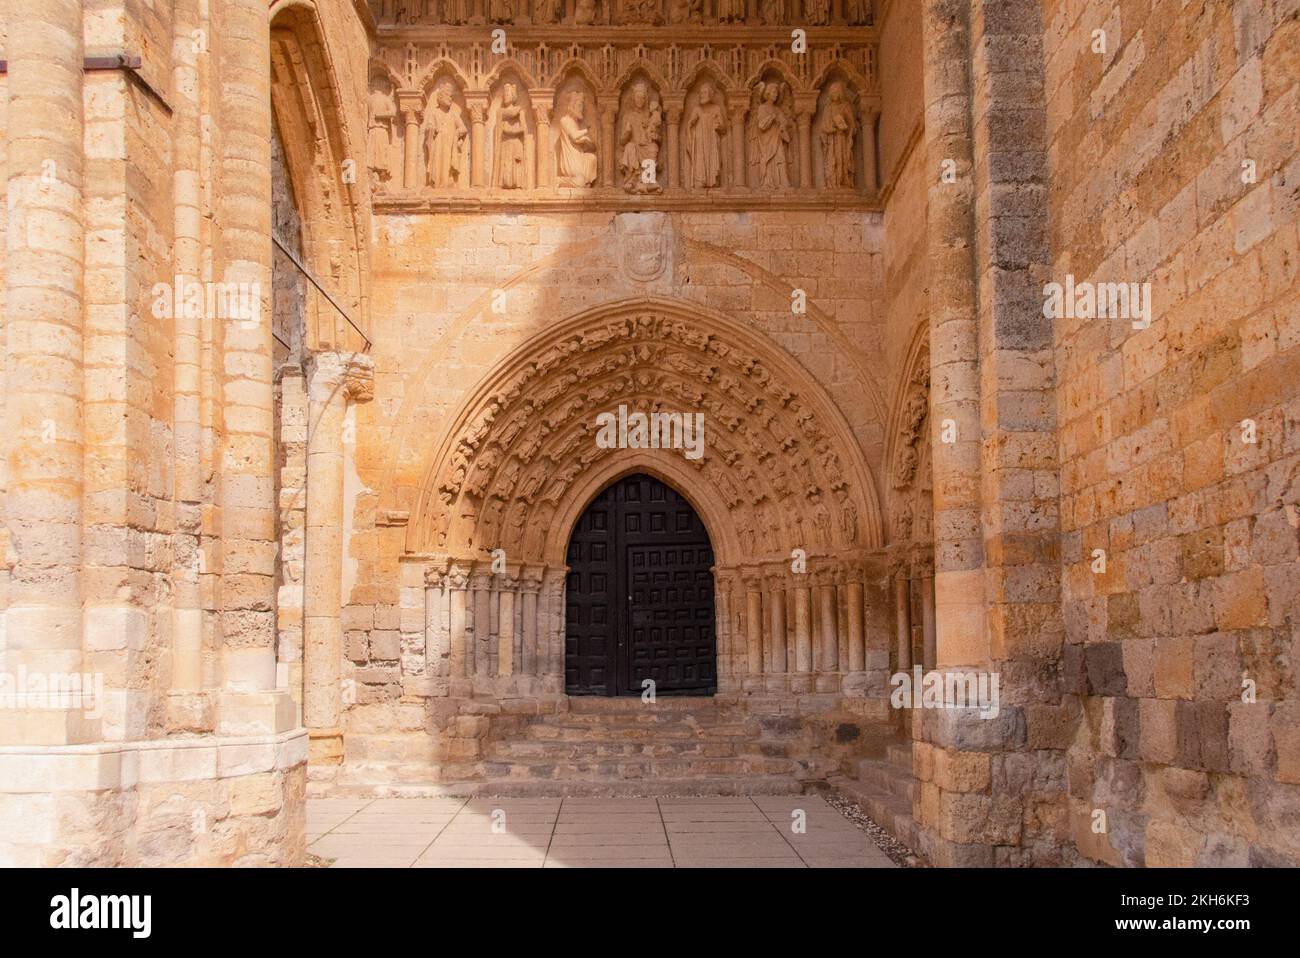 The richly decorated porch of the church Iglesia de Nuestra Señora de la Virgen Blanca in Villalcázar de Sirga. The church was built in the 12th and 13th century by the order of the Knights Templar. Stock Photo